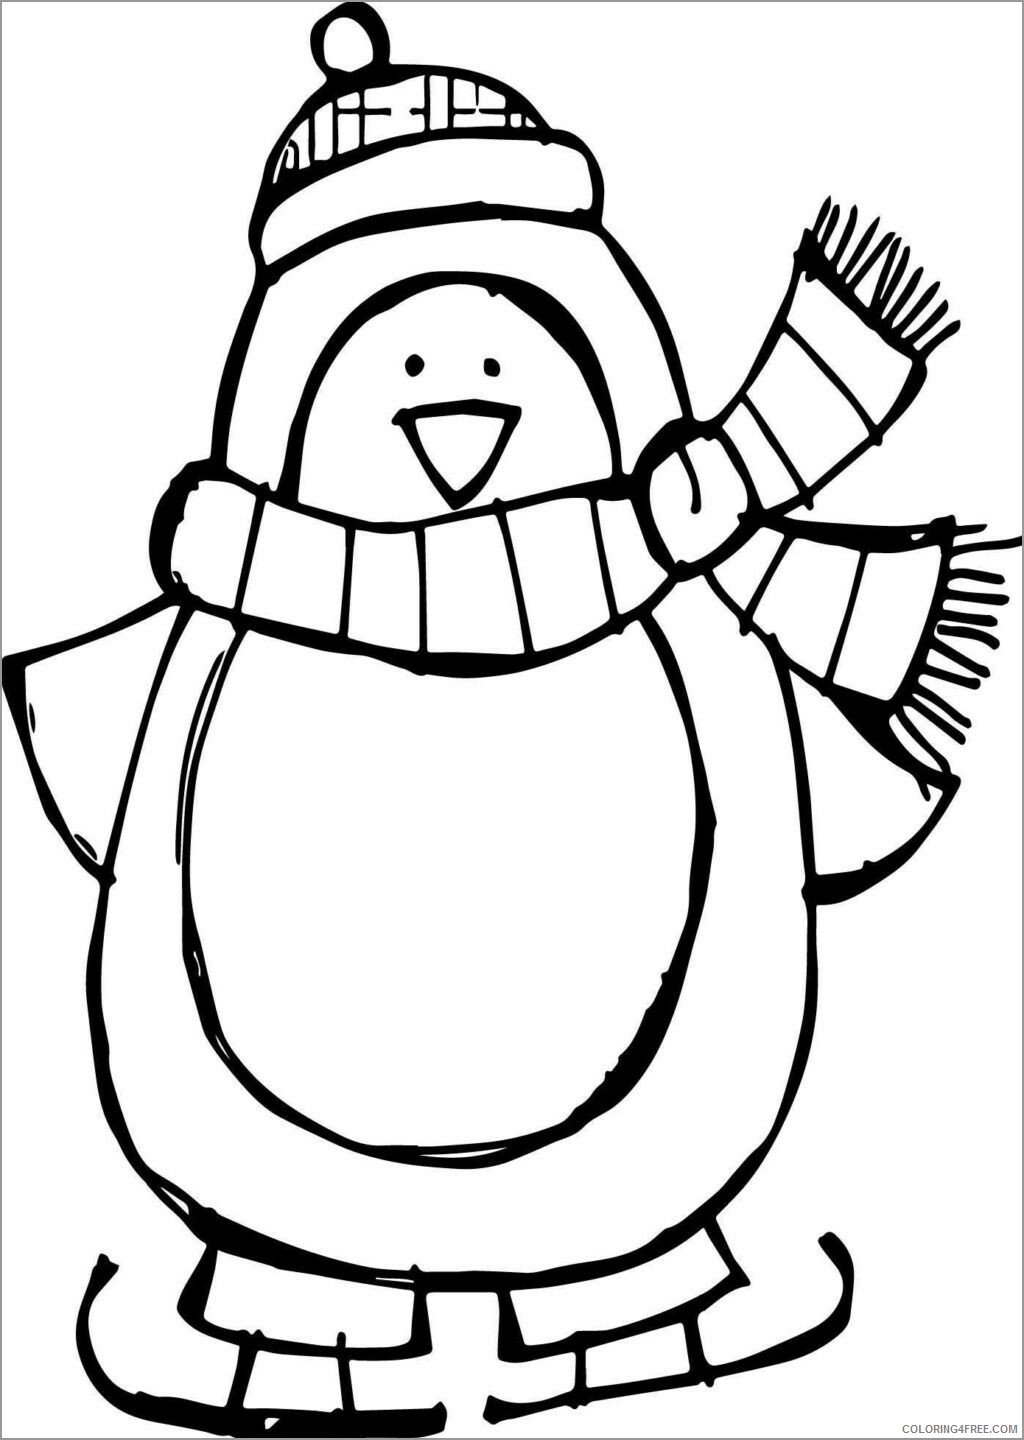 Penguins Coloring Pages Animal Printable Sheets cute christmas penguin 2021 3819 Coloring4free